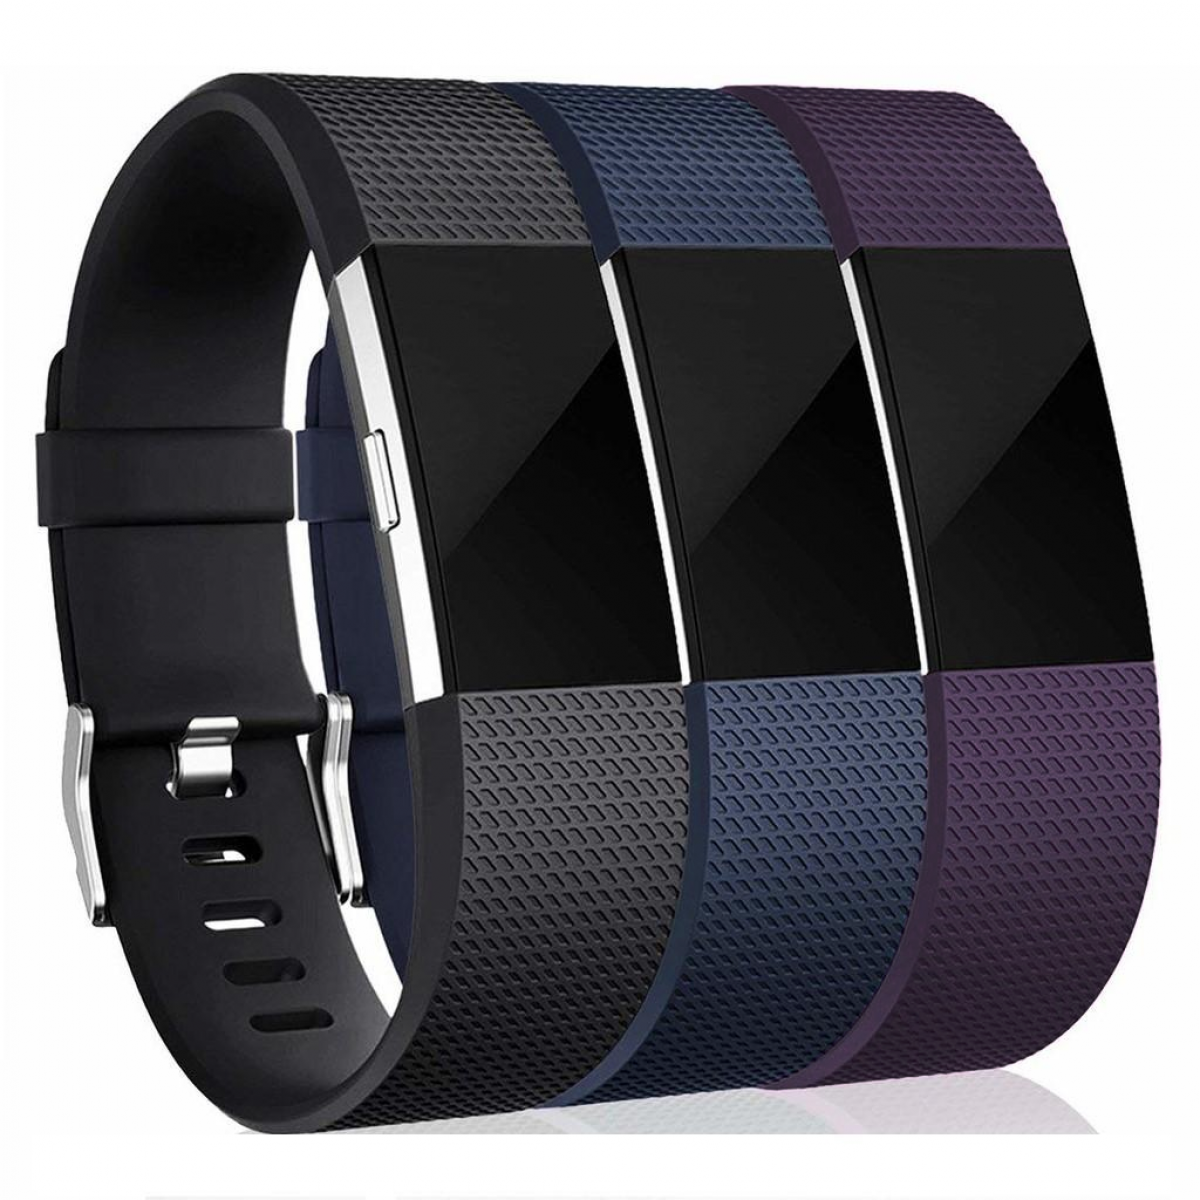 Fitbit (S), Armband Fitbit Charge 3er-Pack 2, (S), Charge Ersatzband, Schwarz INF Fitbit 2 2 Armband schwarz/blau/lila Charge 3er-Pack